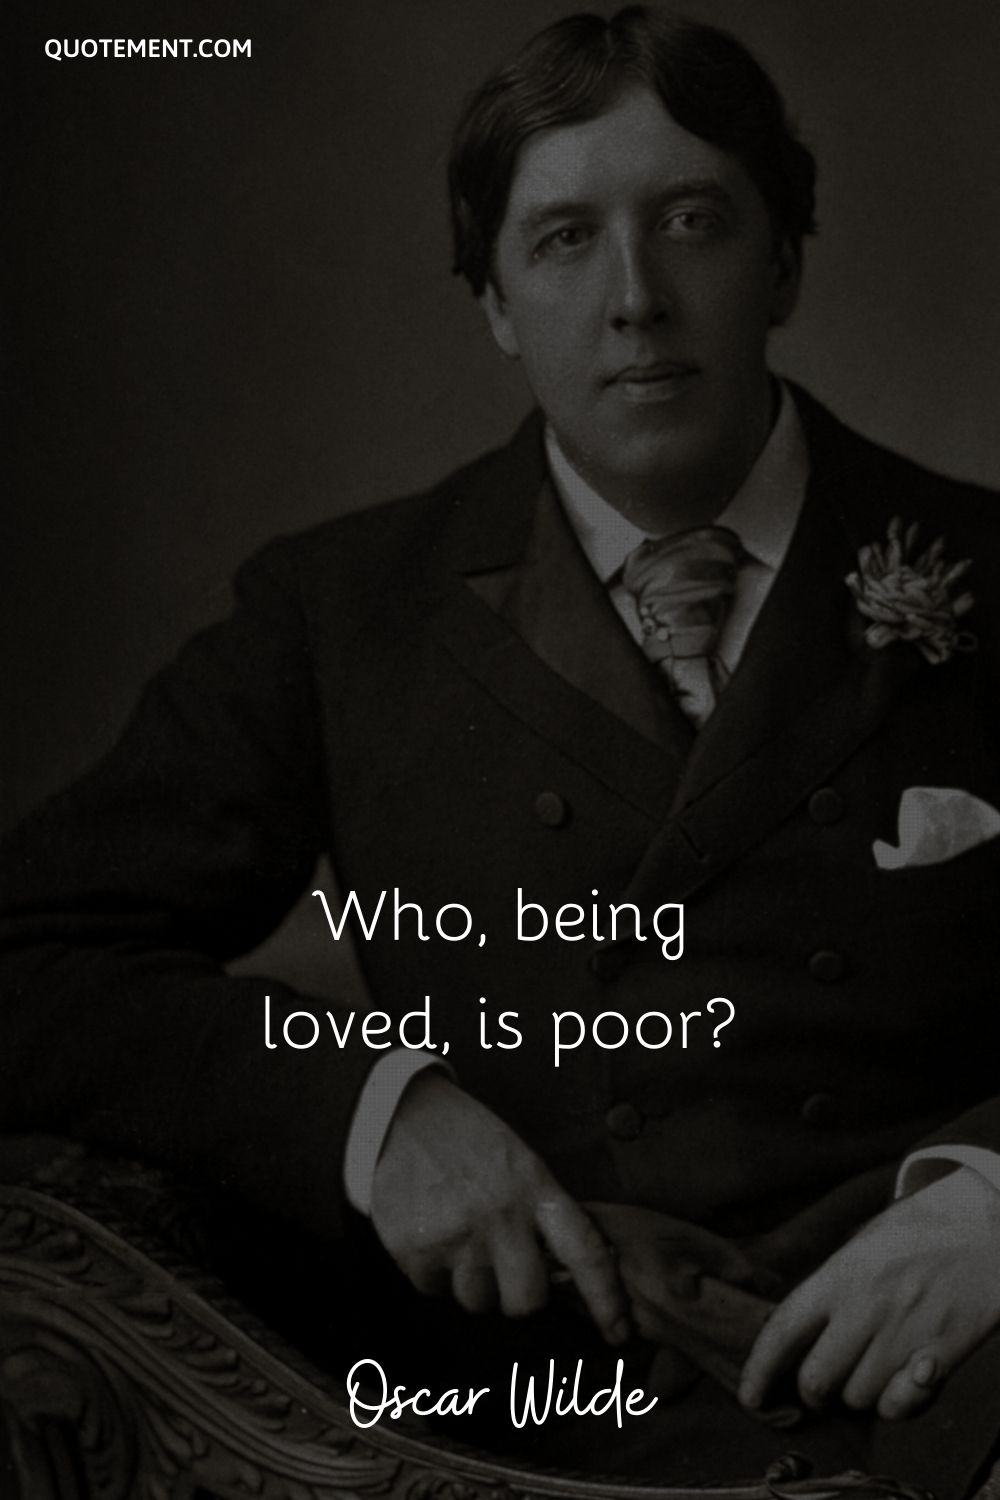 Who, being loved, is poor